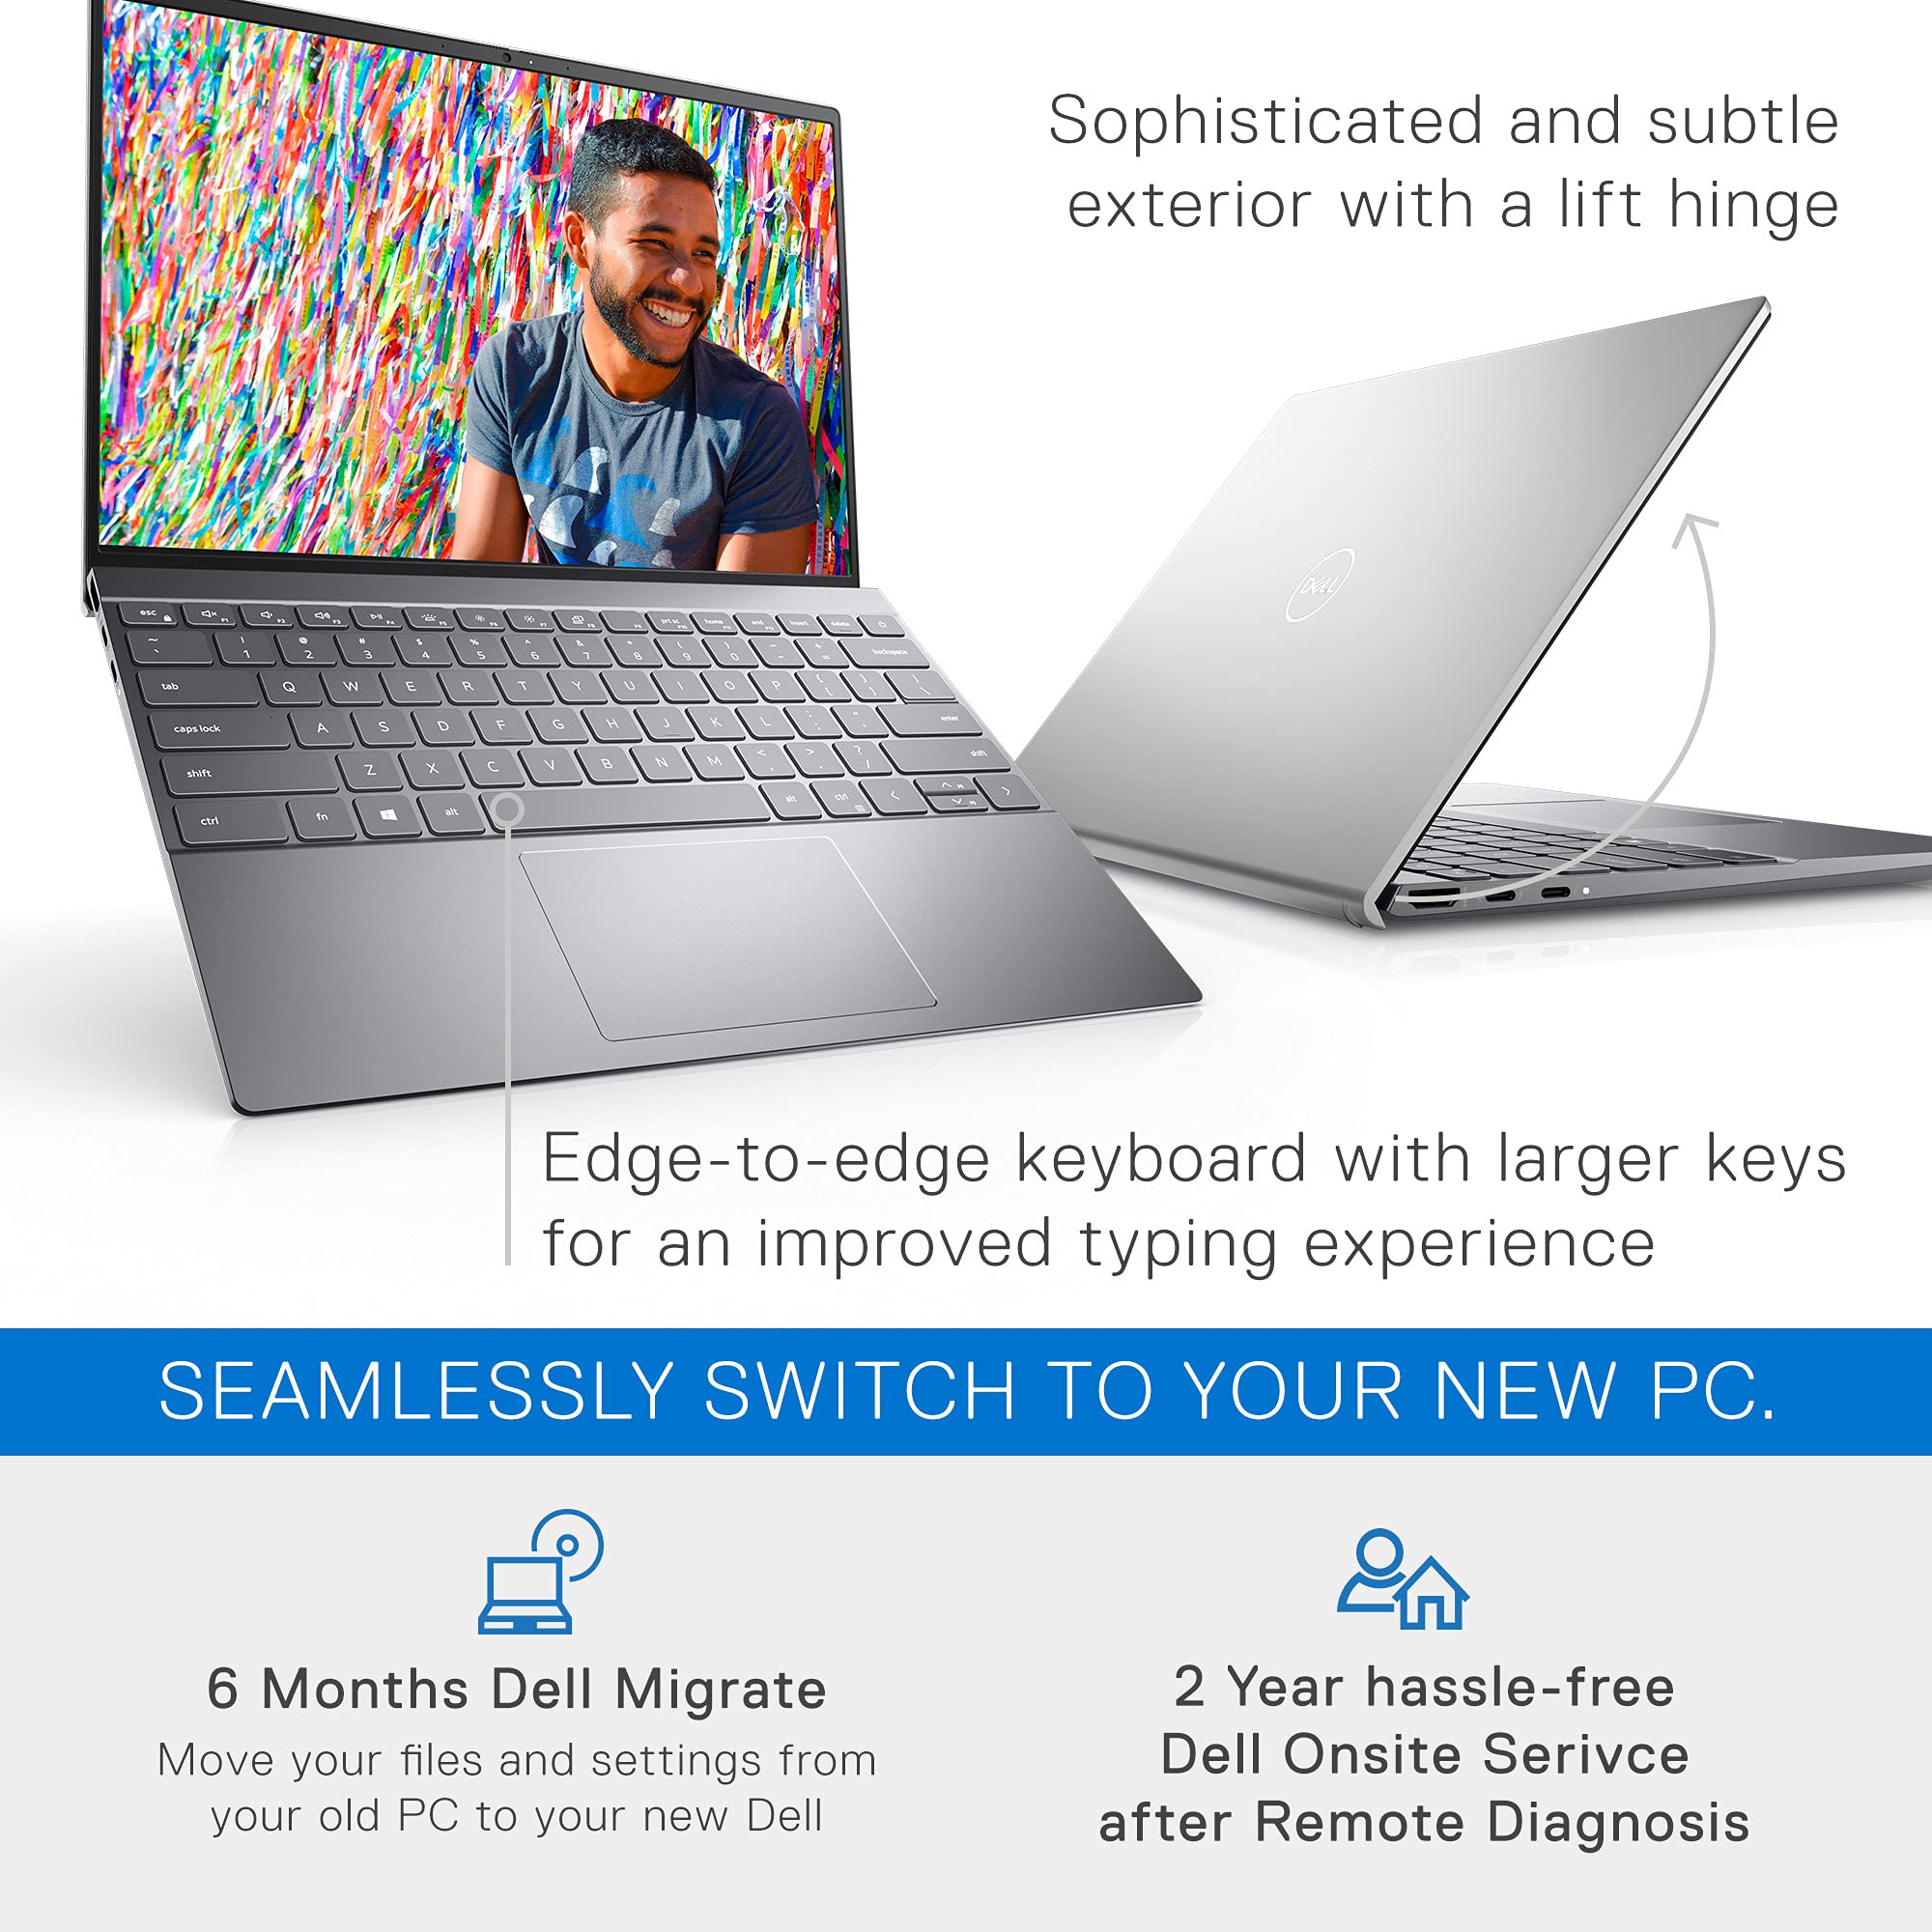 Dell Inspiron 13 5310, 13.3 inch QHD Non-Touch Laptop - Intel Core i7-11390H, 16GB LPDDR4x RAM, 512GB SSD, NVIDIA GeForce MX450 with 2GB GDDR6, Windows 11 Home - Platinum Silver (Latest Model)